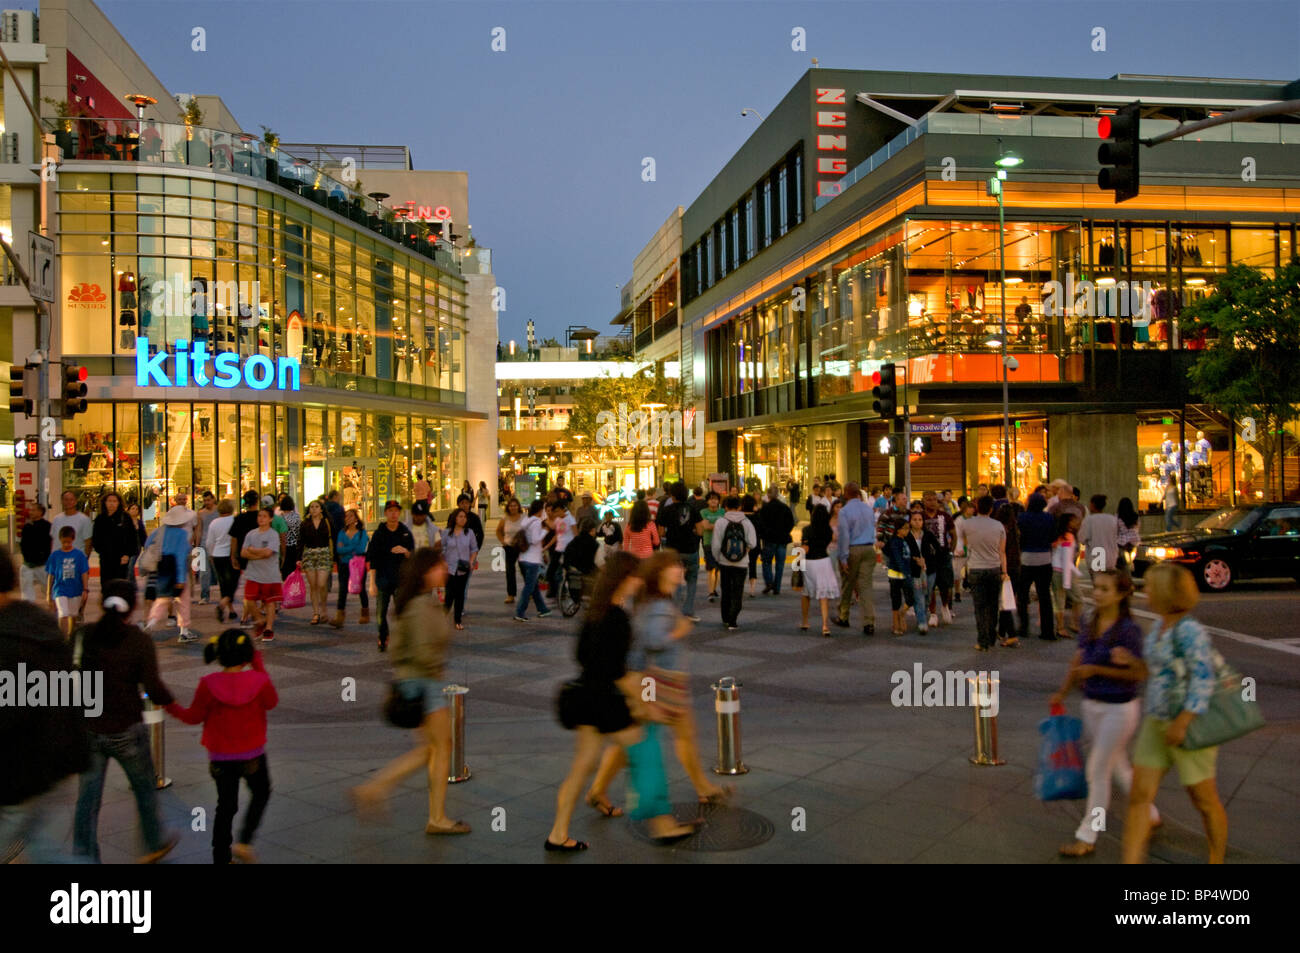 Santa monica place shopping mall hi-res stock photography and images - Alamy